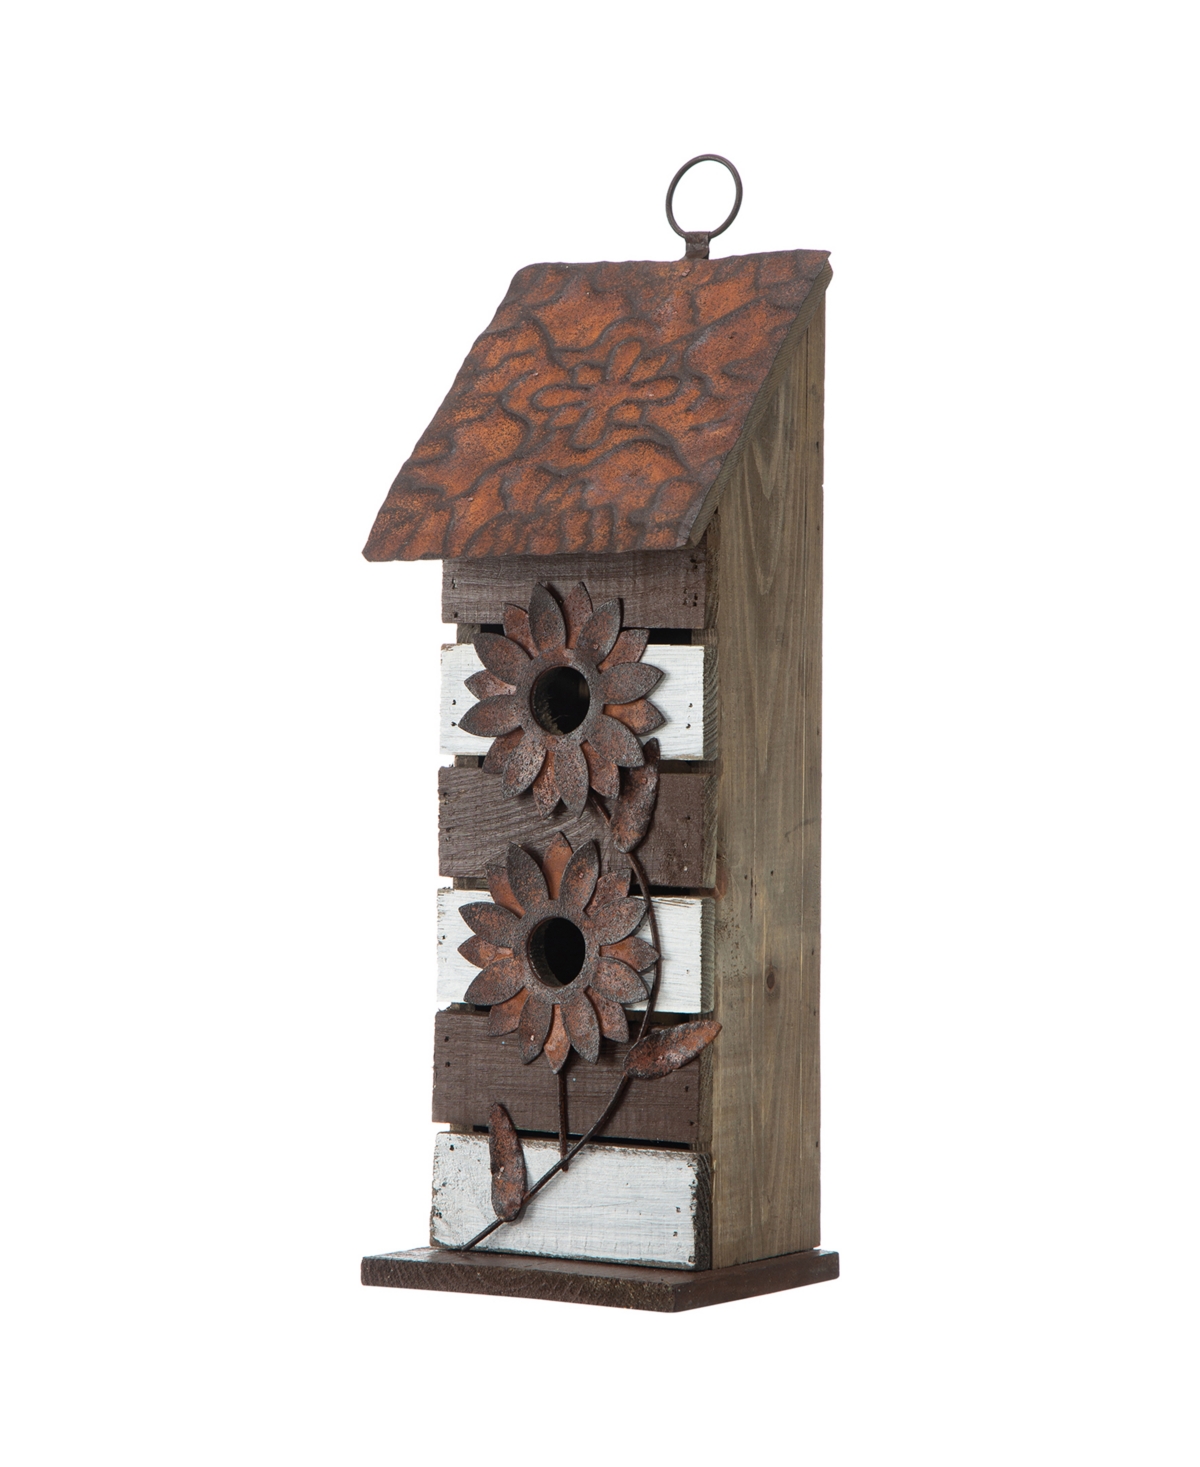 Glitzhome 14.5" Distressed Birdhouse With 3d Rustic Flowers In Brown